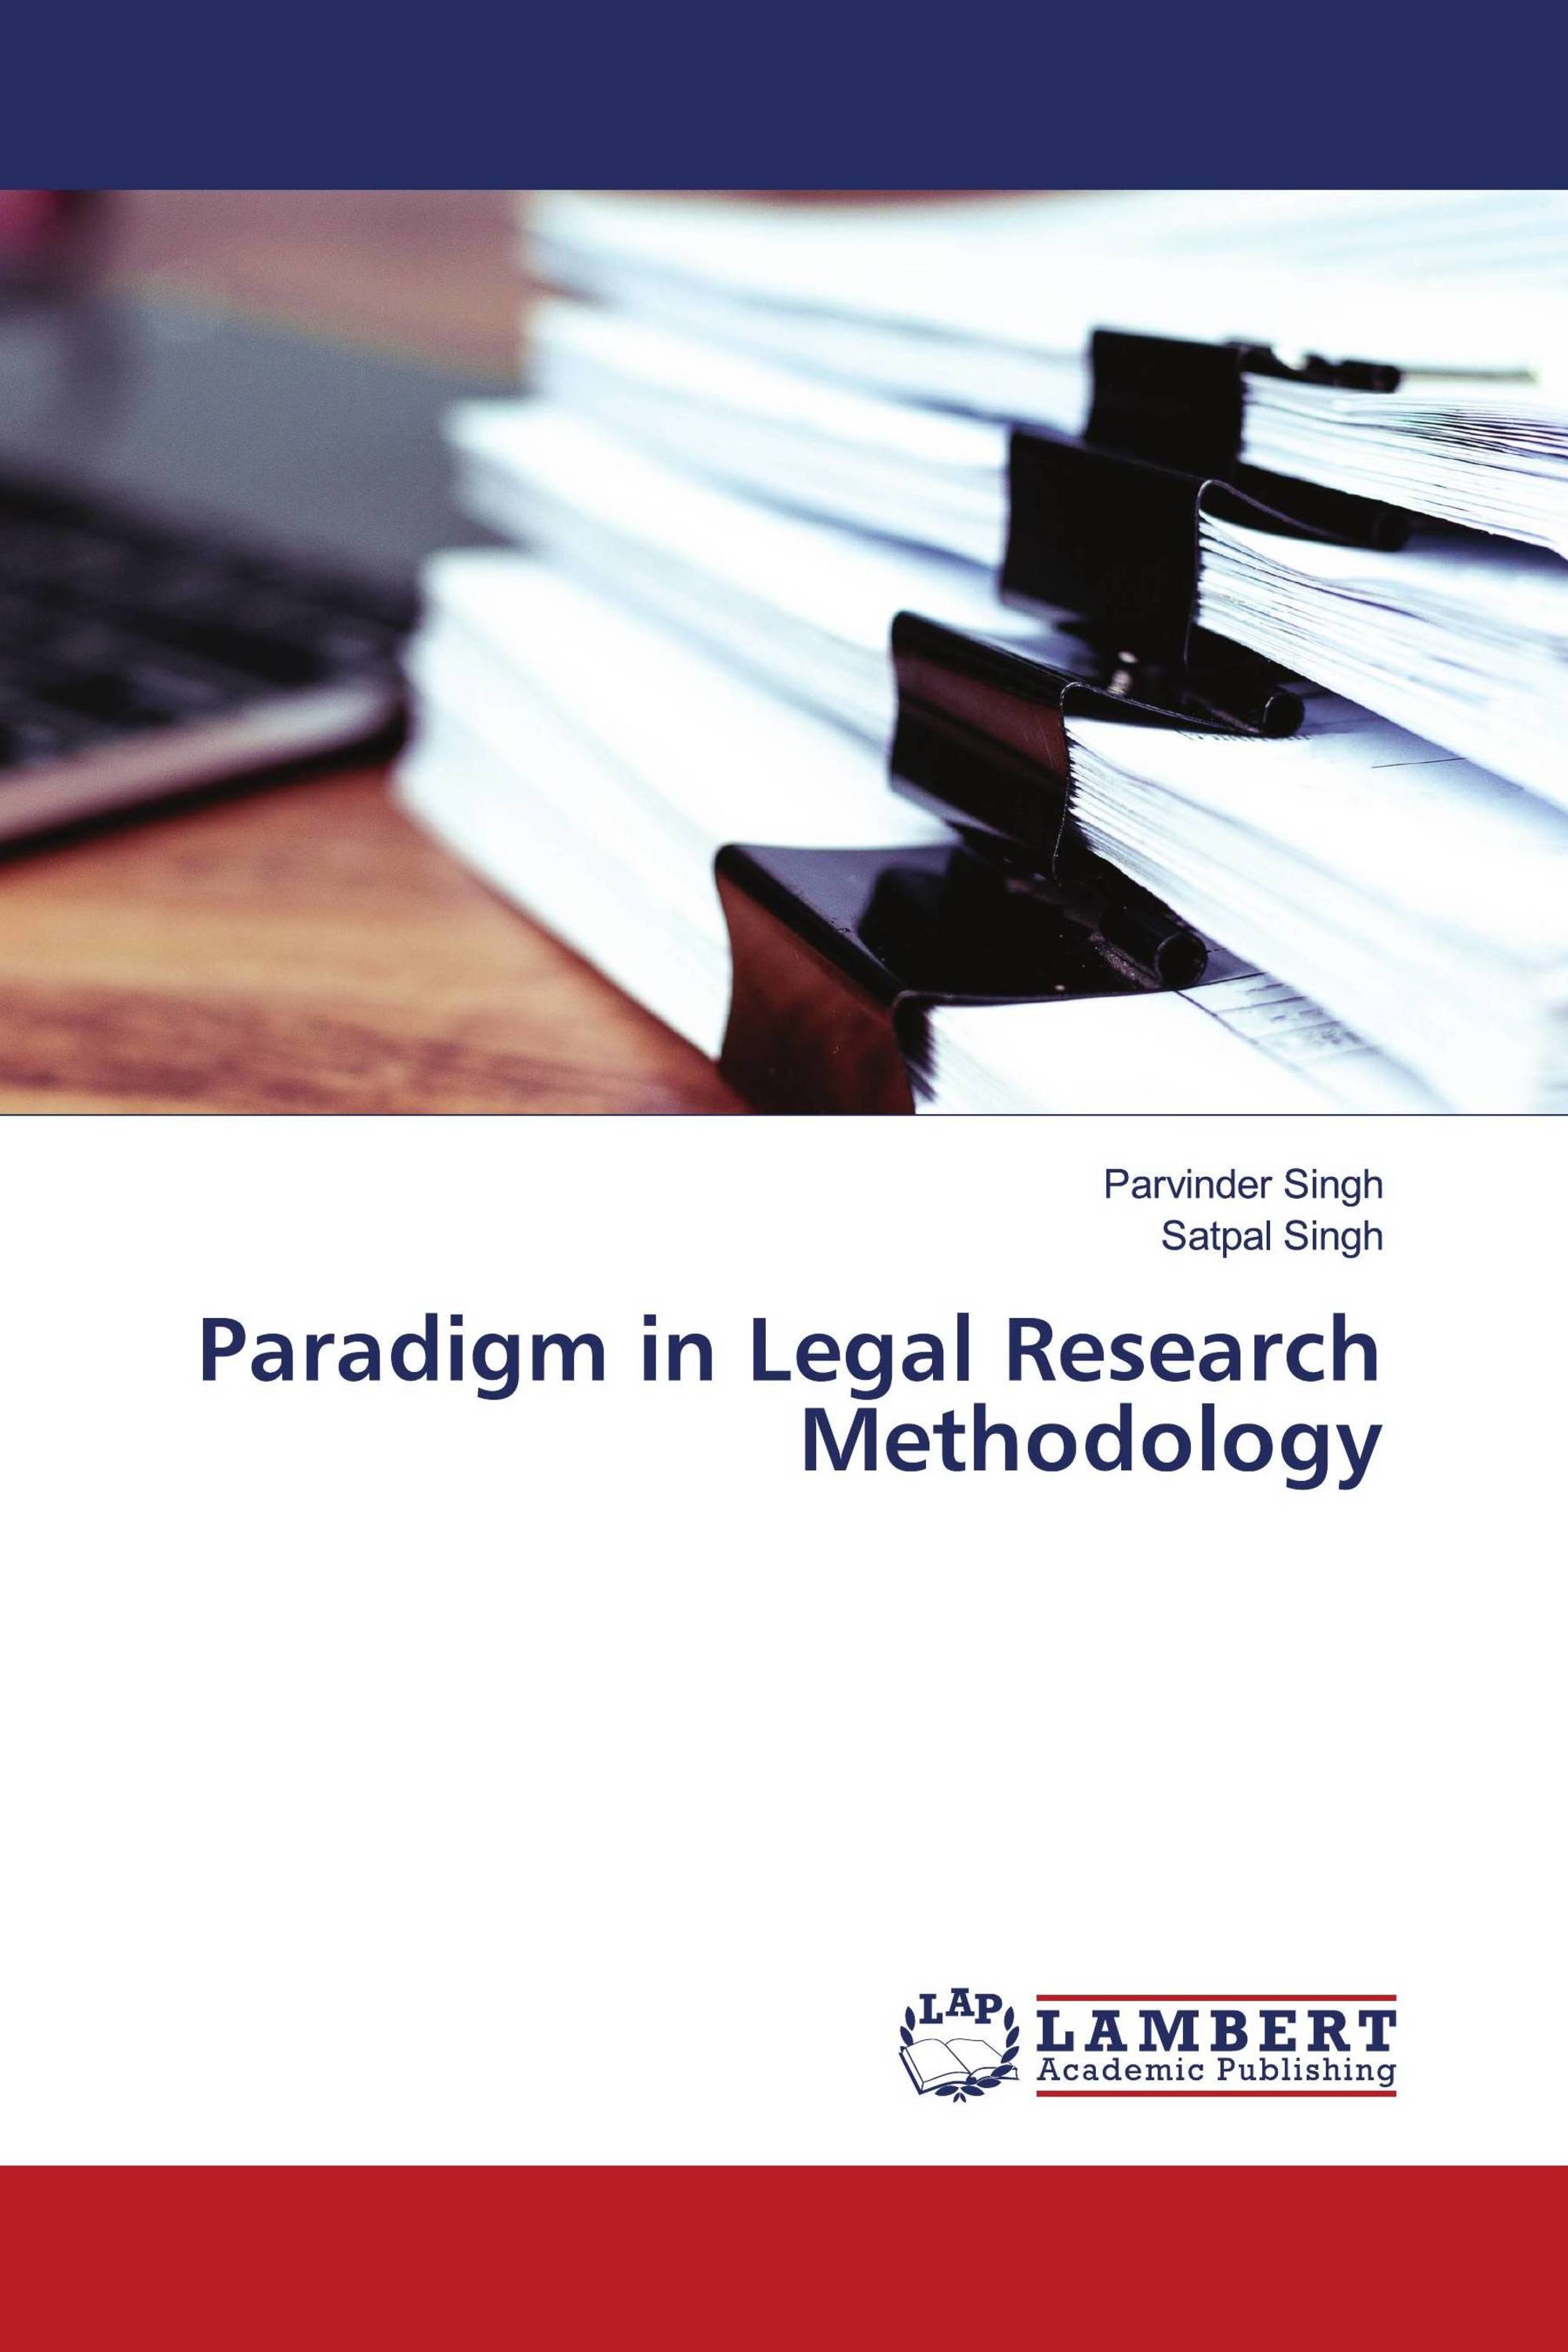 topics for legal research methodology